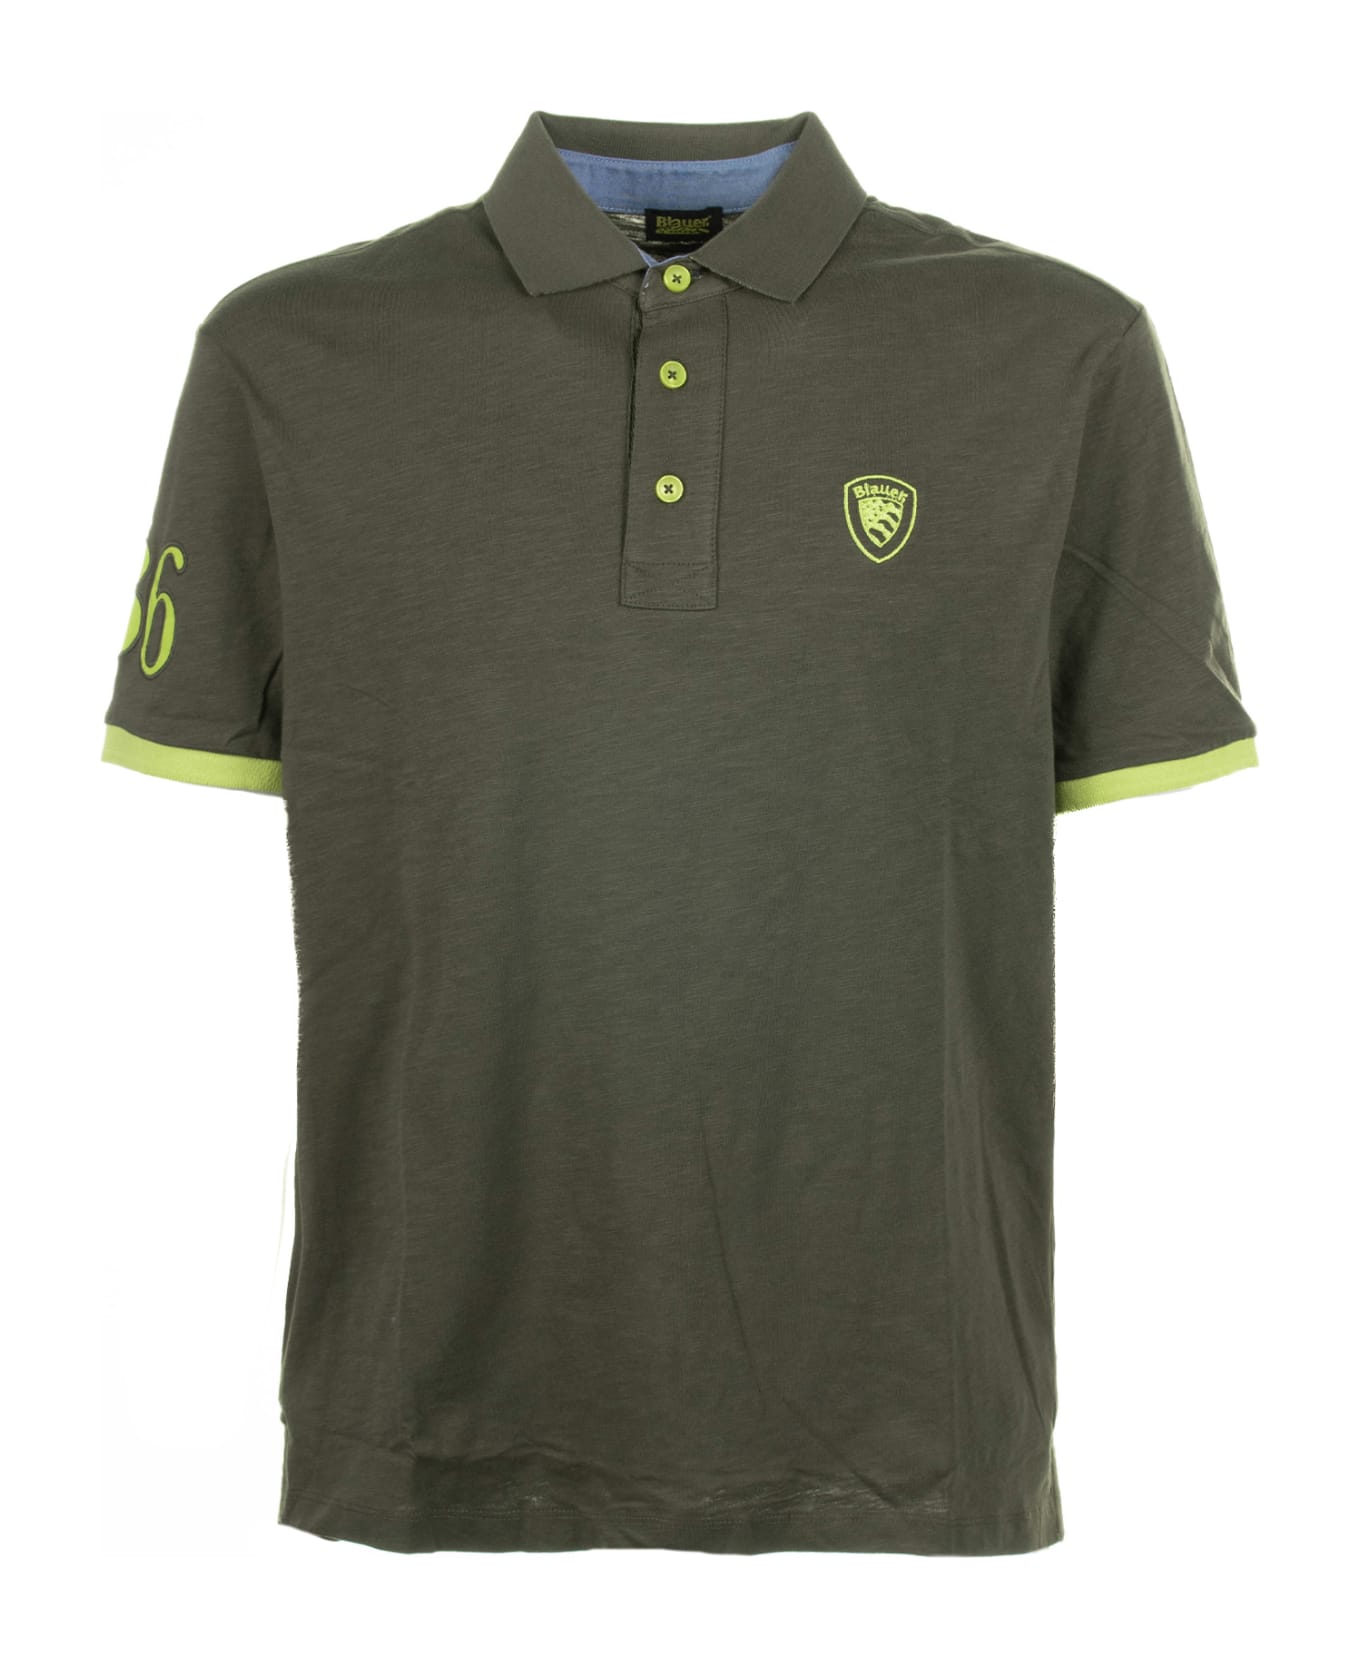 Blauer Polo 36 With Short Sleeves Green - VERDE SIEPE